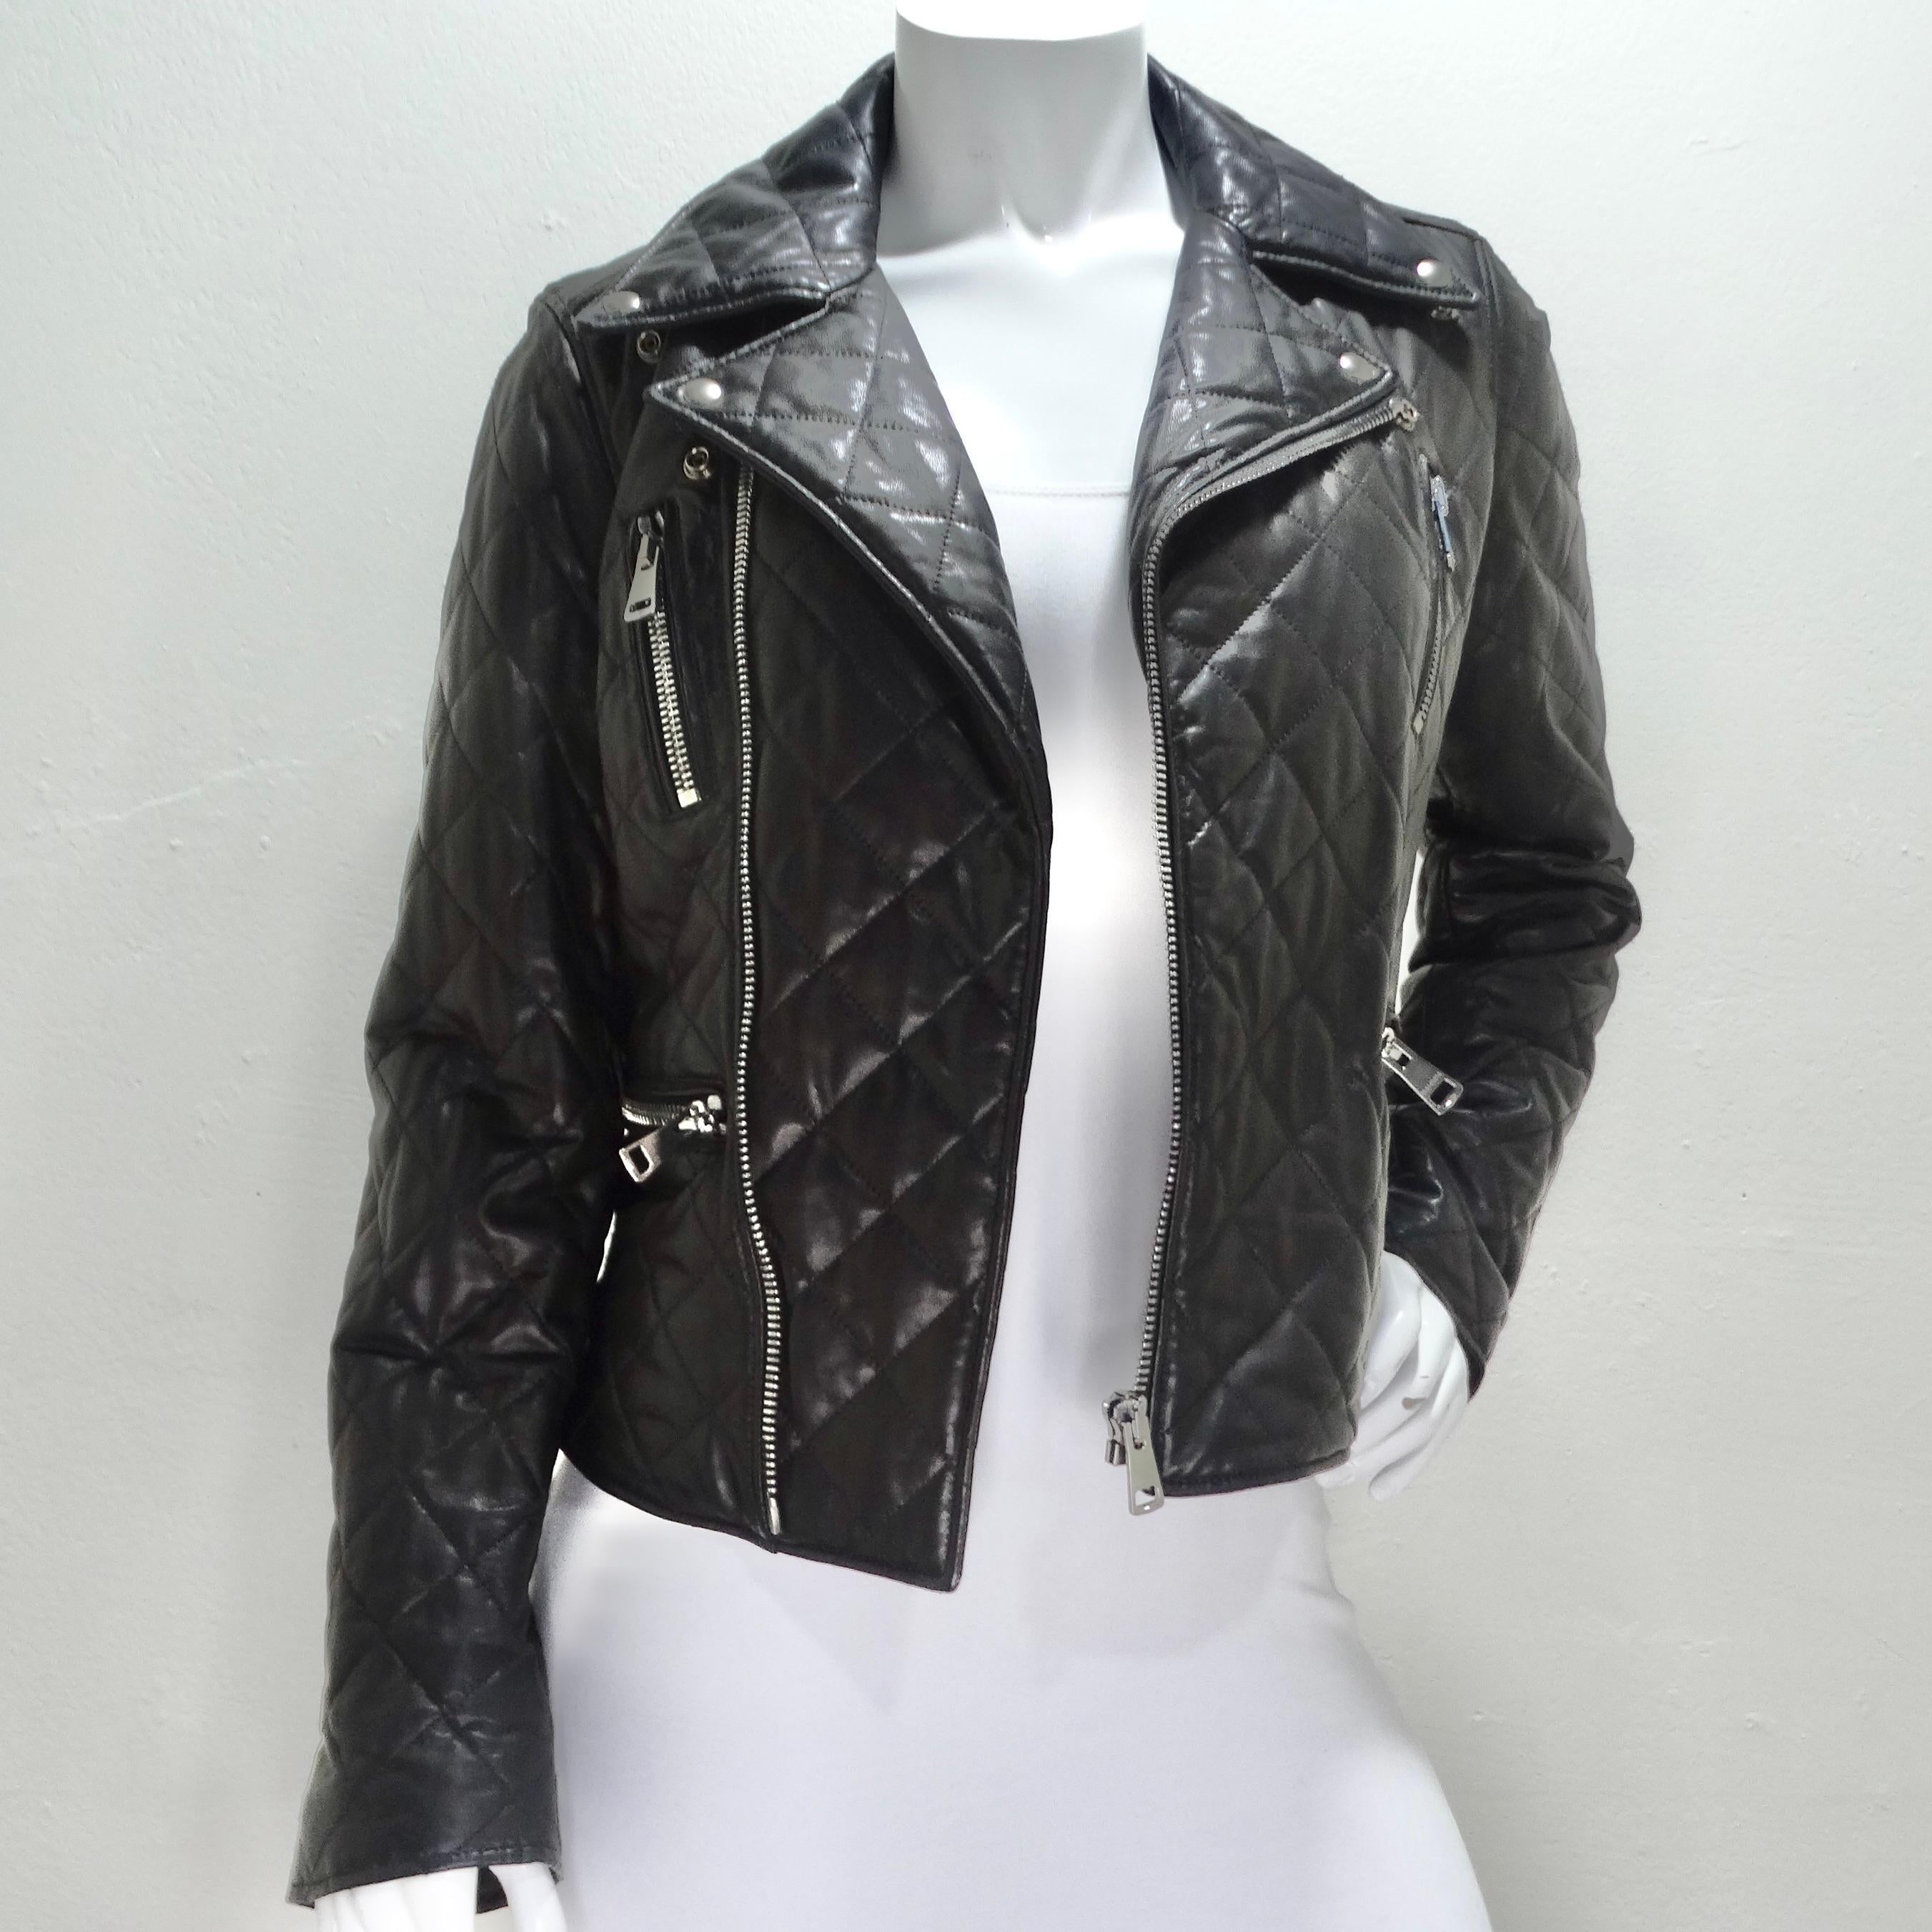 Introducing the epitome of luxury and style – the Gucci Black Leather Pearl Logo Moto Jacket. This classic Moto-style leather jacket is more than just a piece of clothing; it's a statement of sophistication and glamour. Crafted in Italy, this jacket